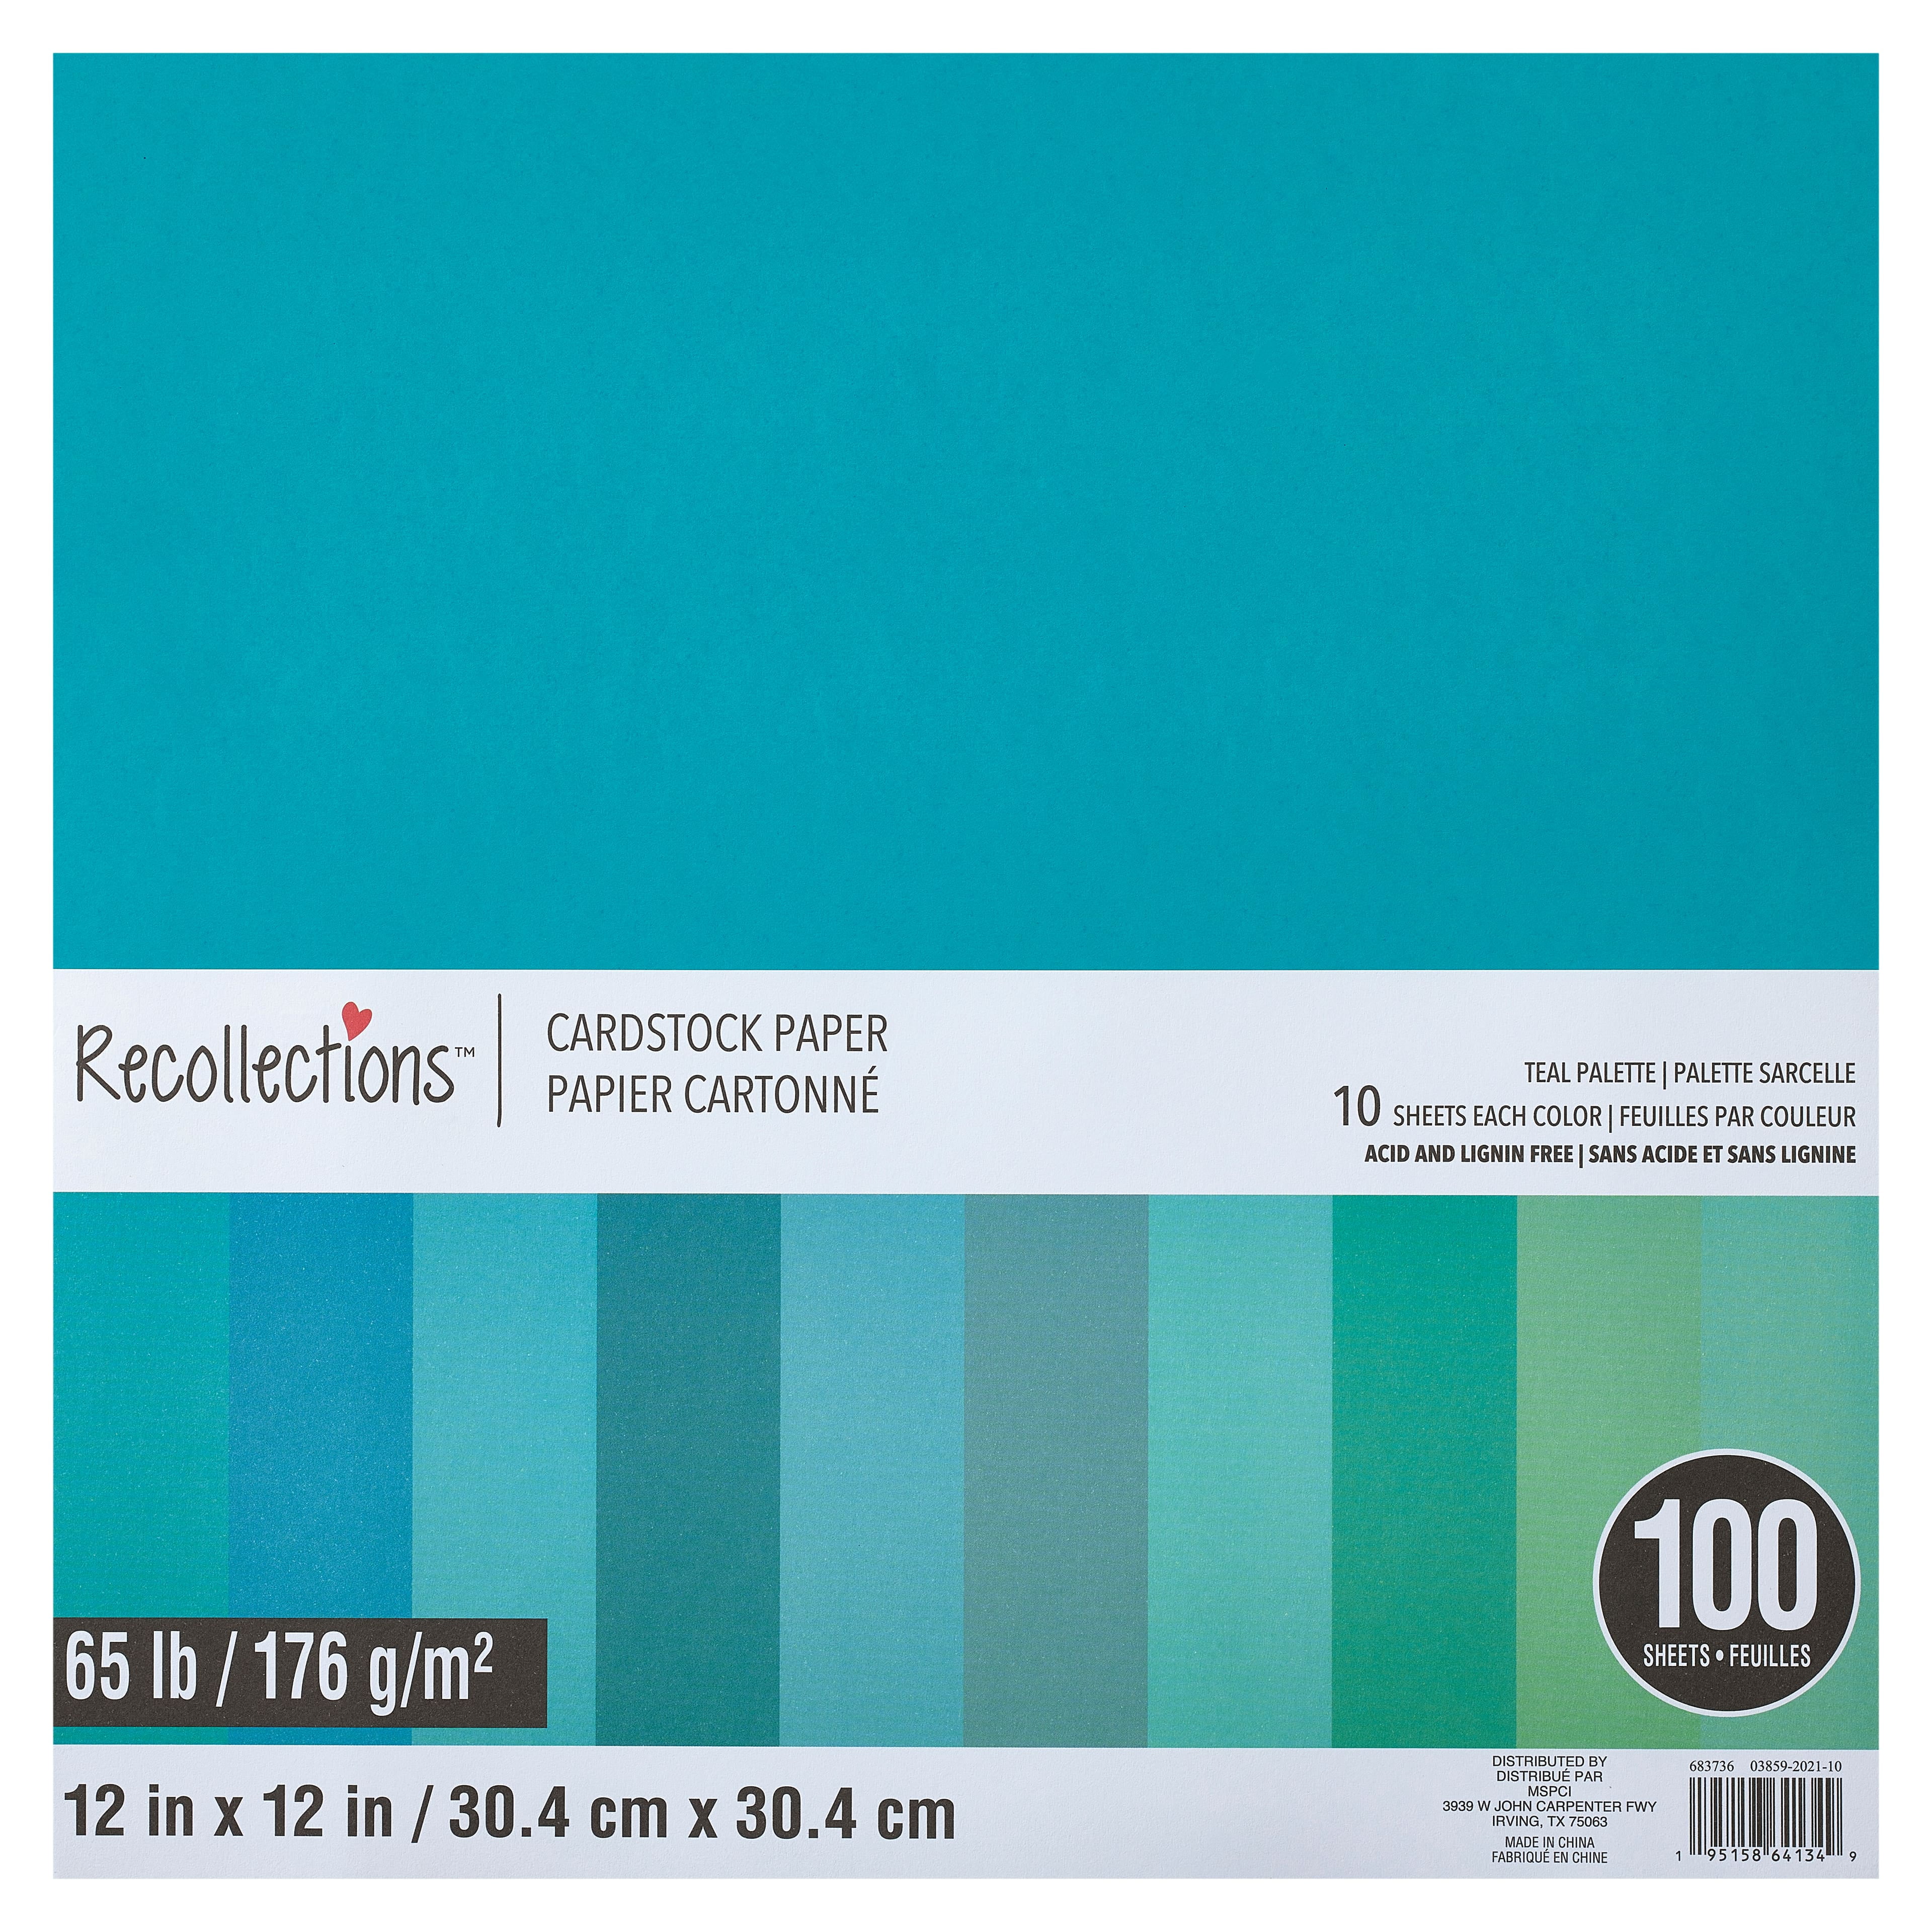 Teal Palette 12 x 12 Cardstock Paper by Recollections™, 100 Sheets 